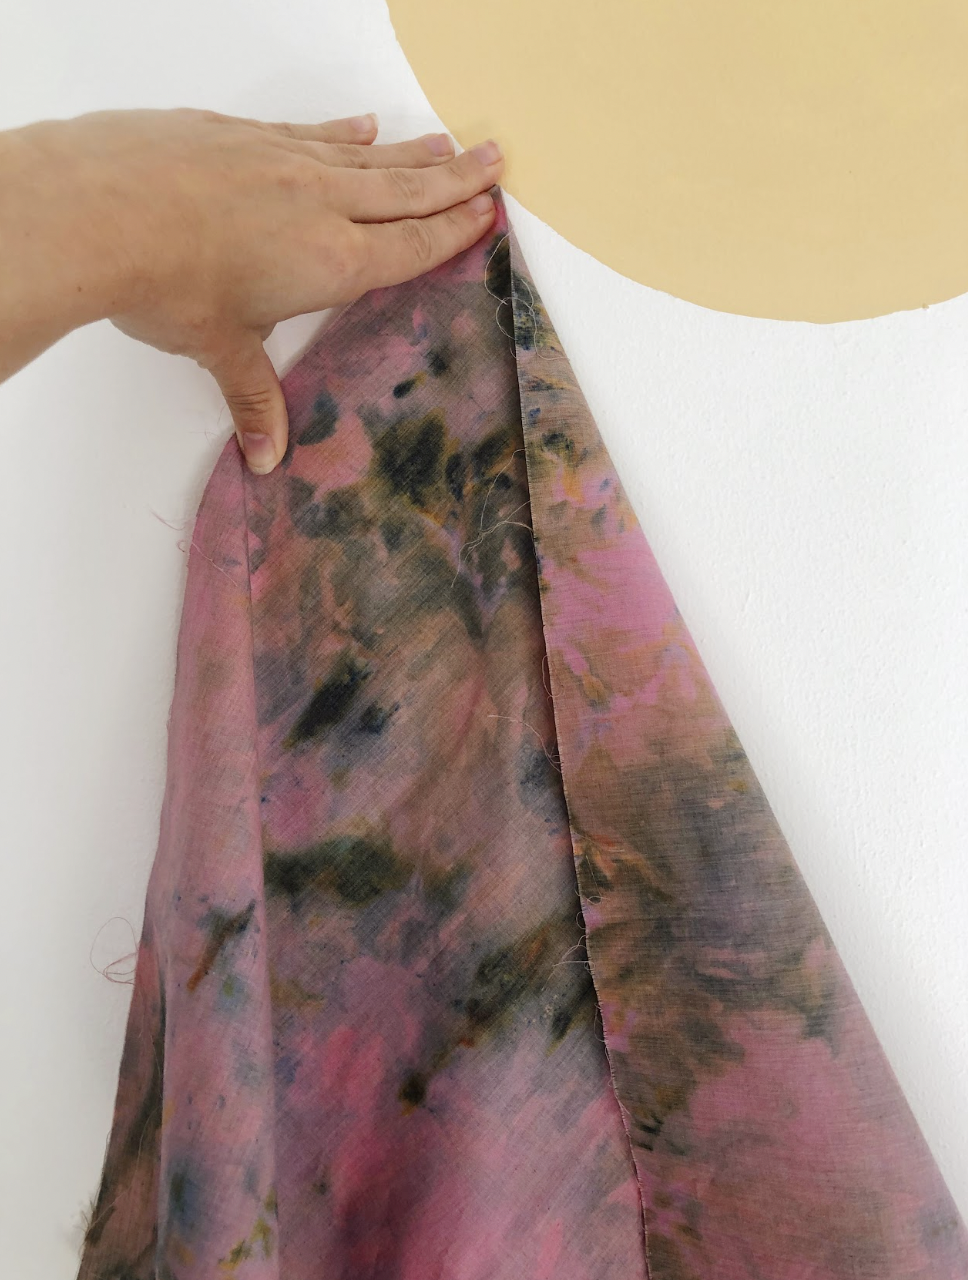 How to Dye Fabric: Ice Dyeing 